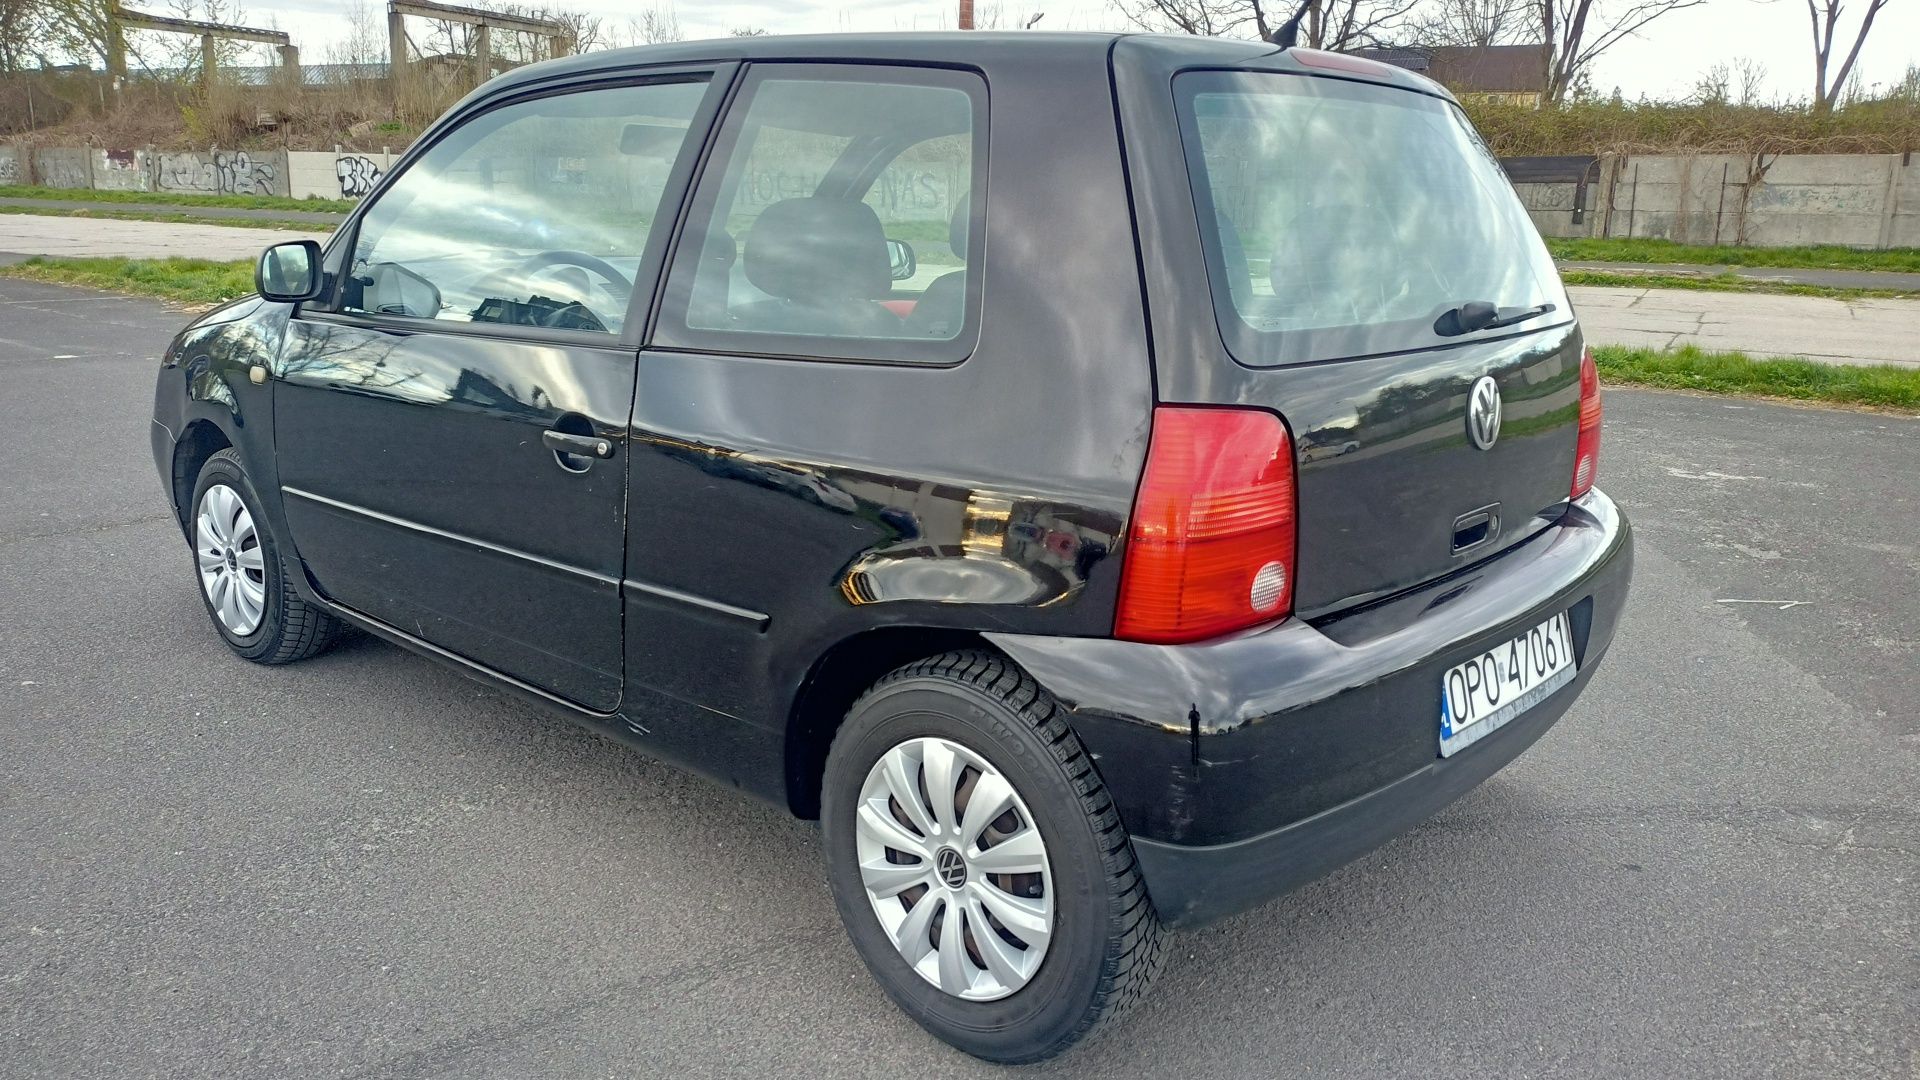 Volkswagen Lupo 1.0 benzyna